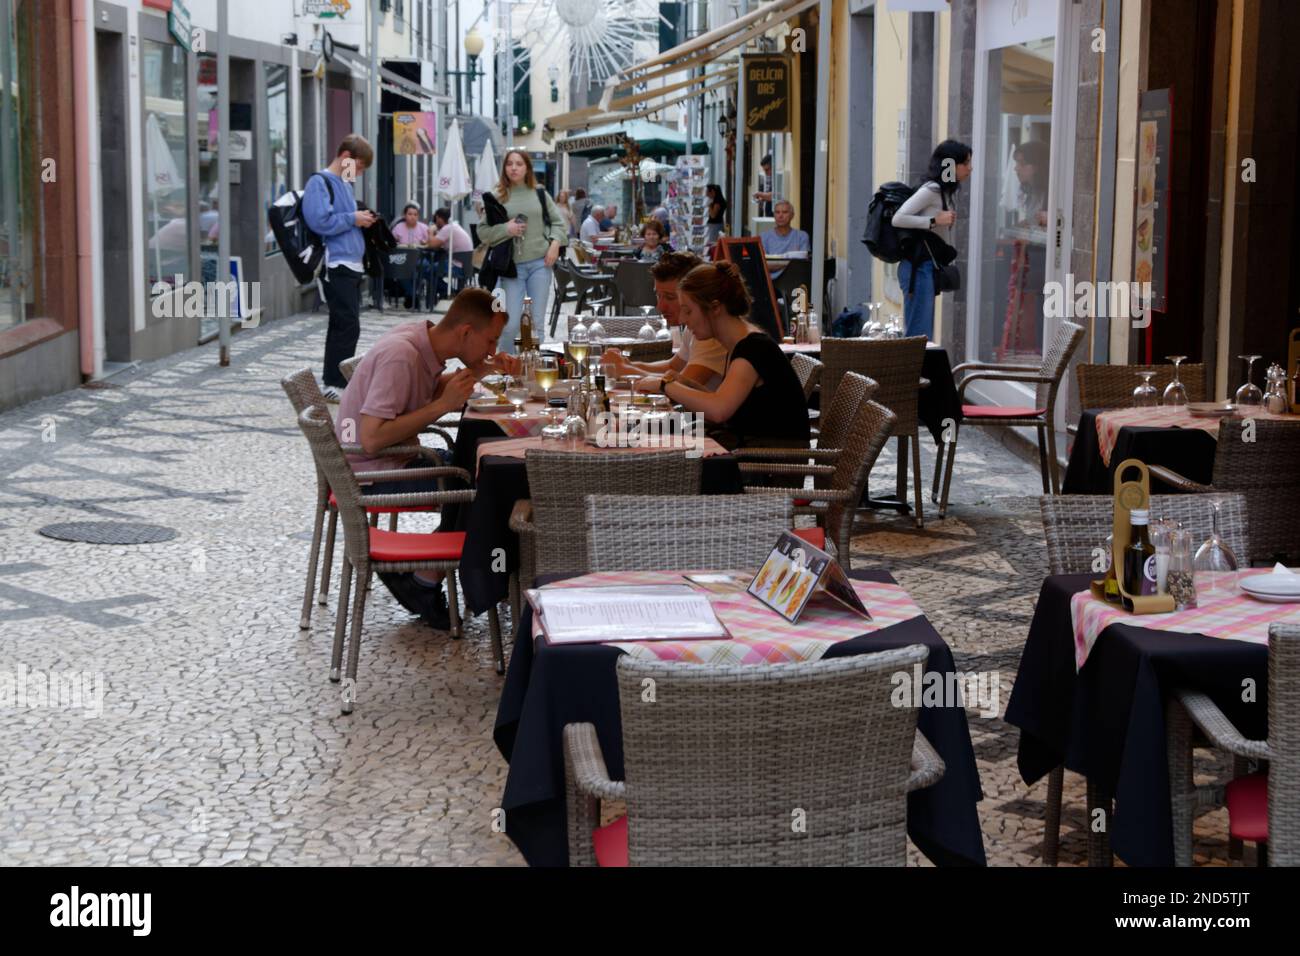 Funchal, Madeira street scene - street cafe with patrons eating. Empty tables in front. Shoppers in the background. Pedestrian only - no traffic Stock Photo